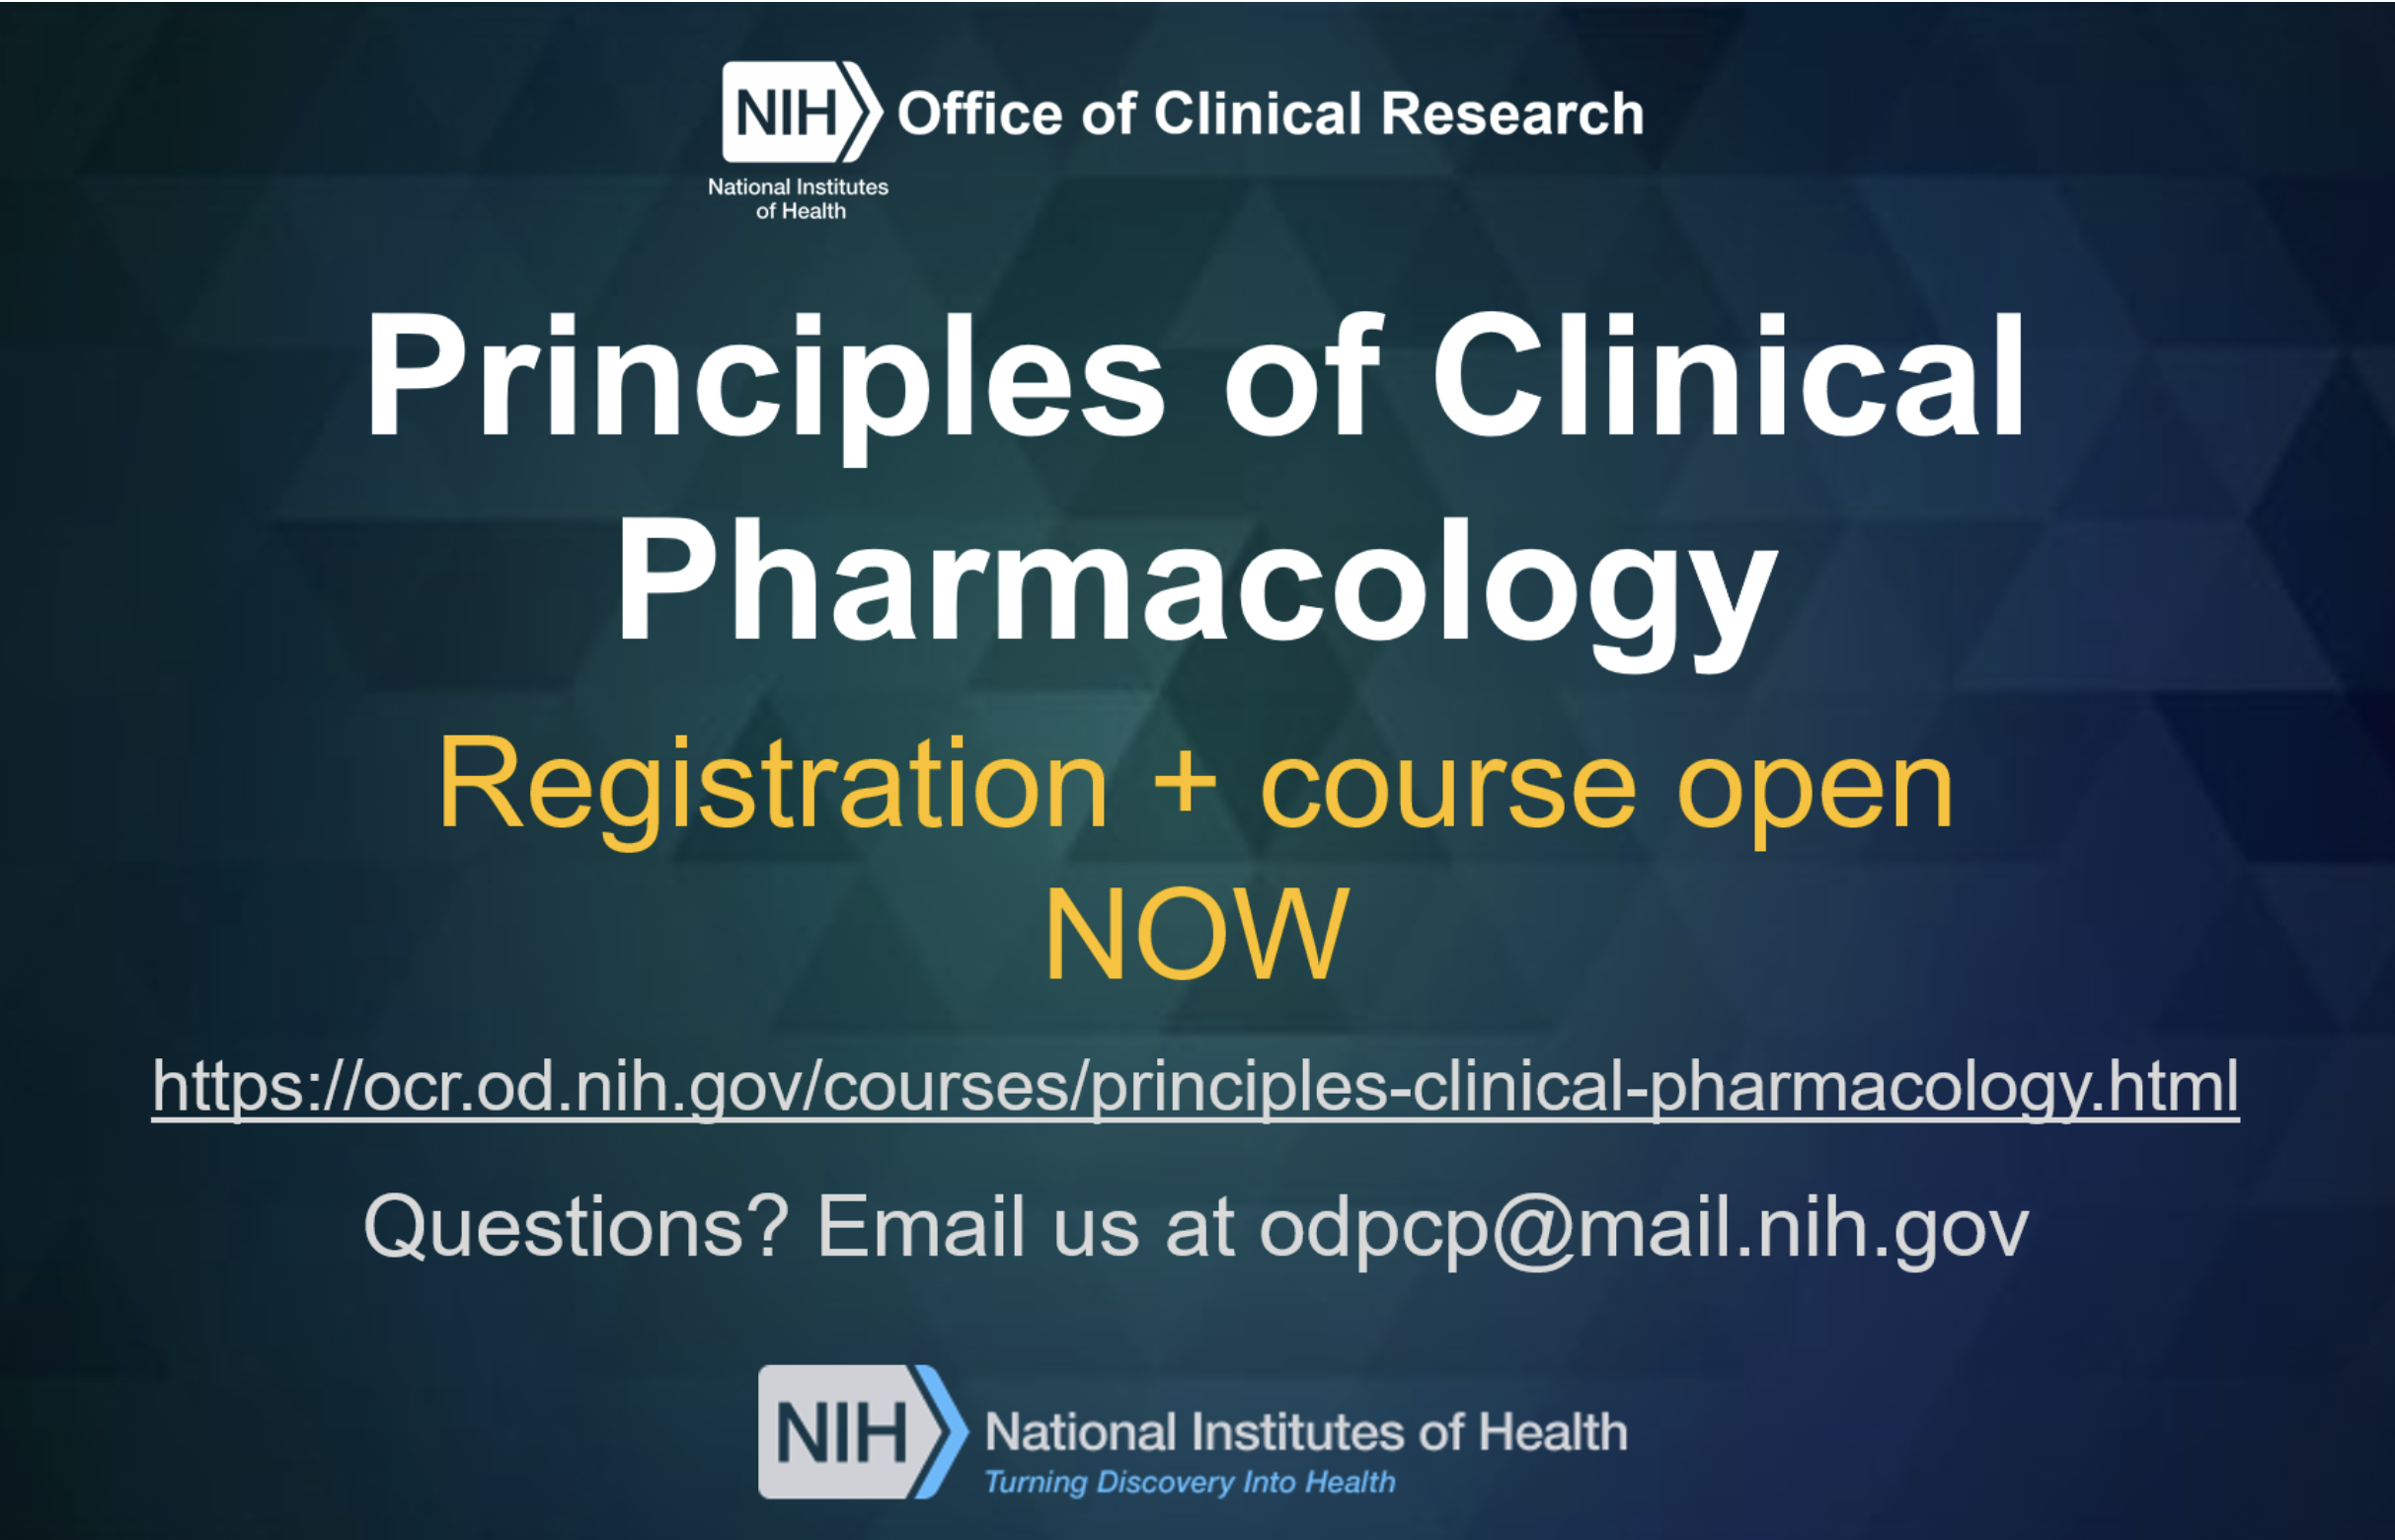 Link to Principles Of Clinical Pharmacology course registration